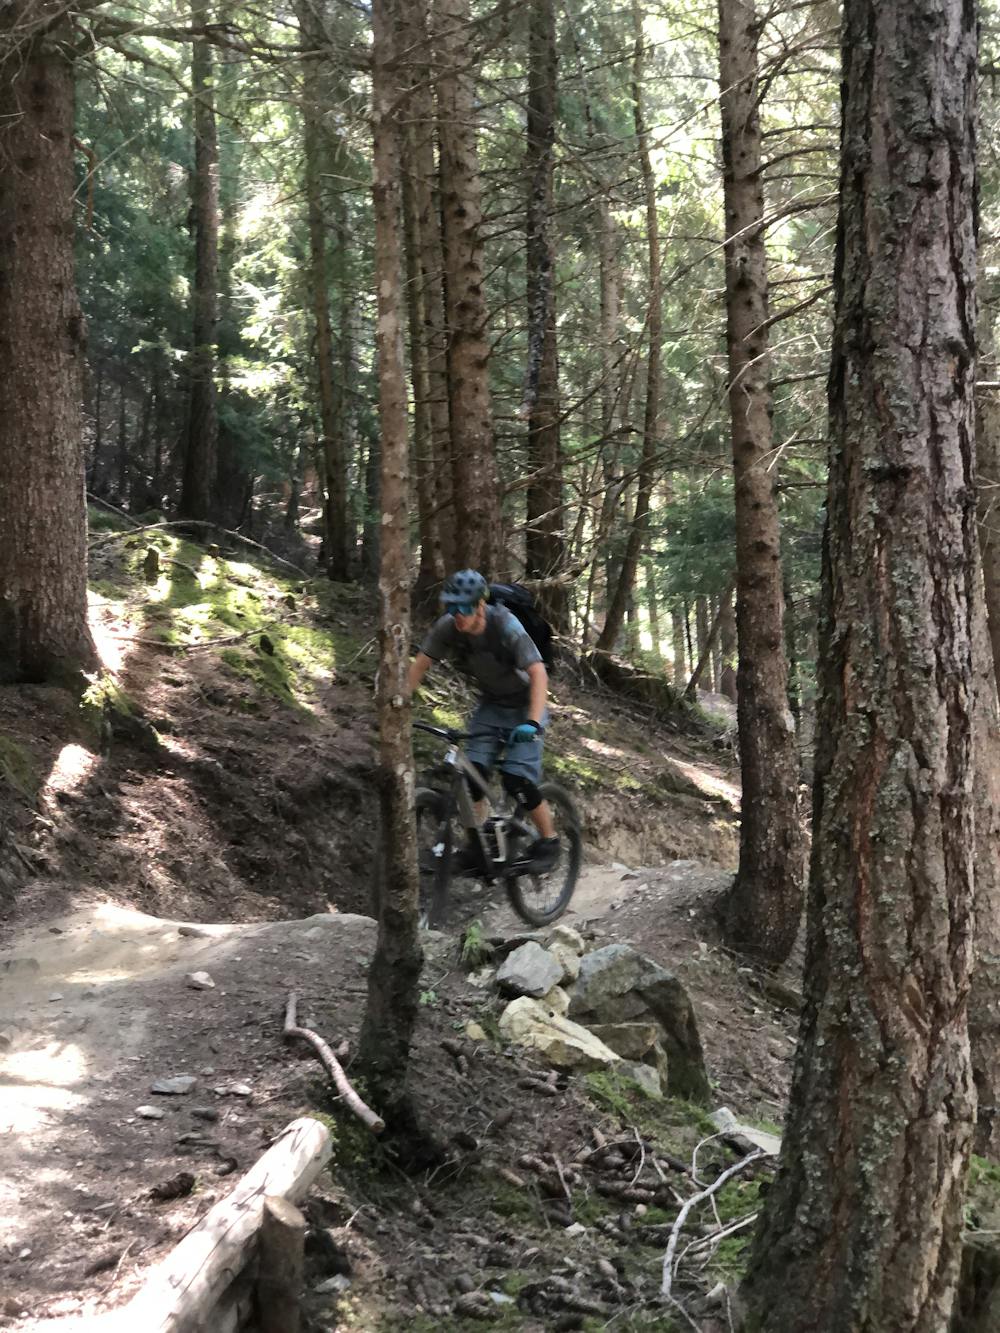 Riding in between trees